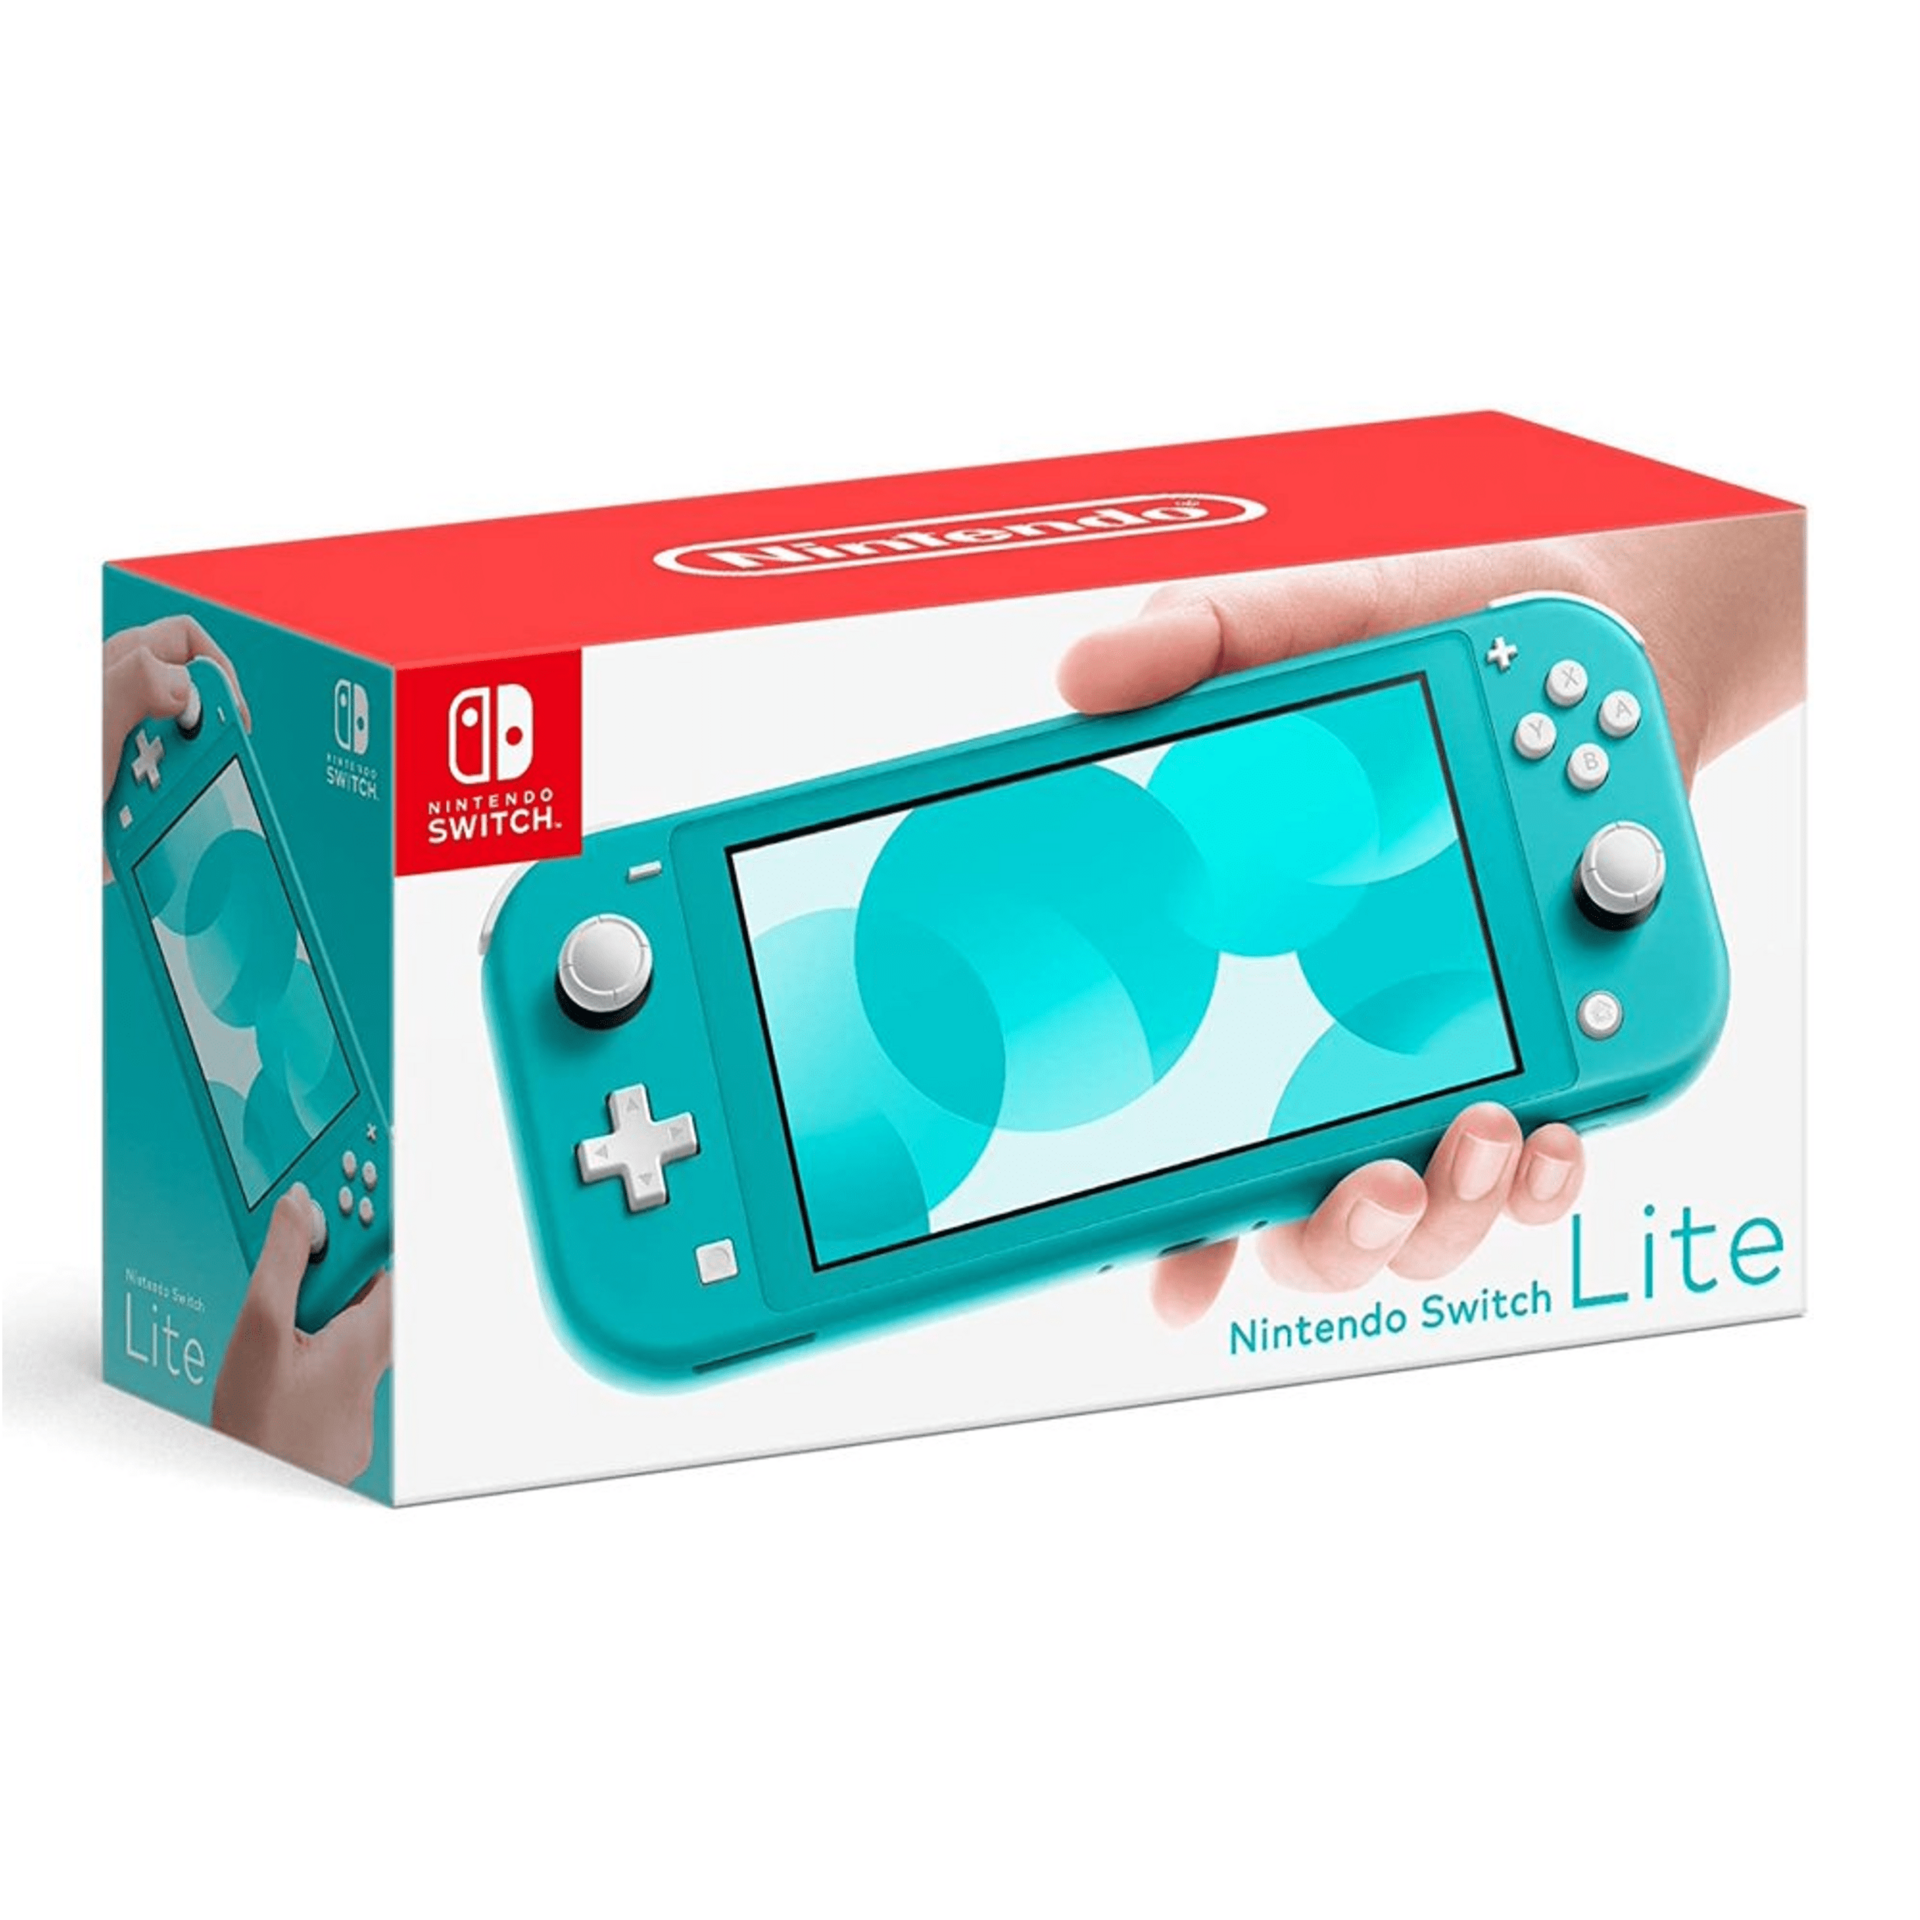 Nintendo Switch Lite Console - Turquoise [Complete] - Nintendo Switch Hardware